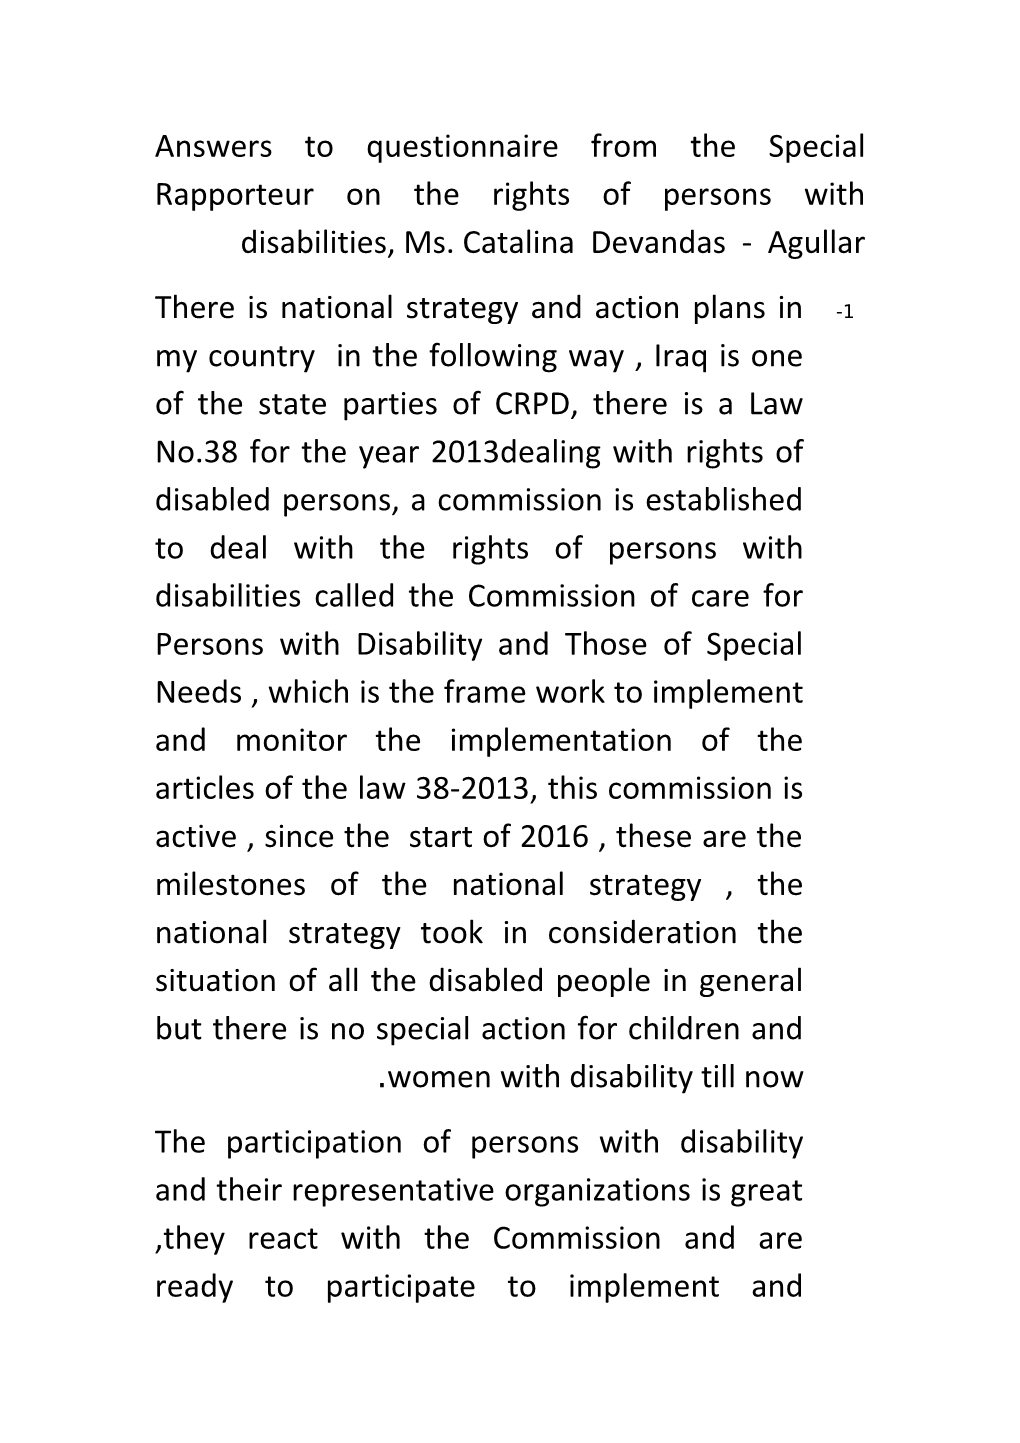 Answers to Questionnaire from the Special Rapporteur on the Rights of Persons with Disabilities